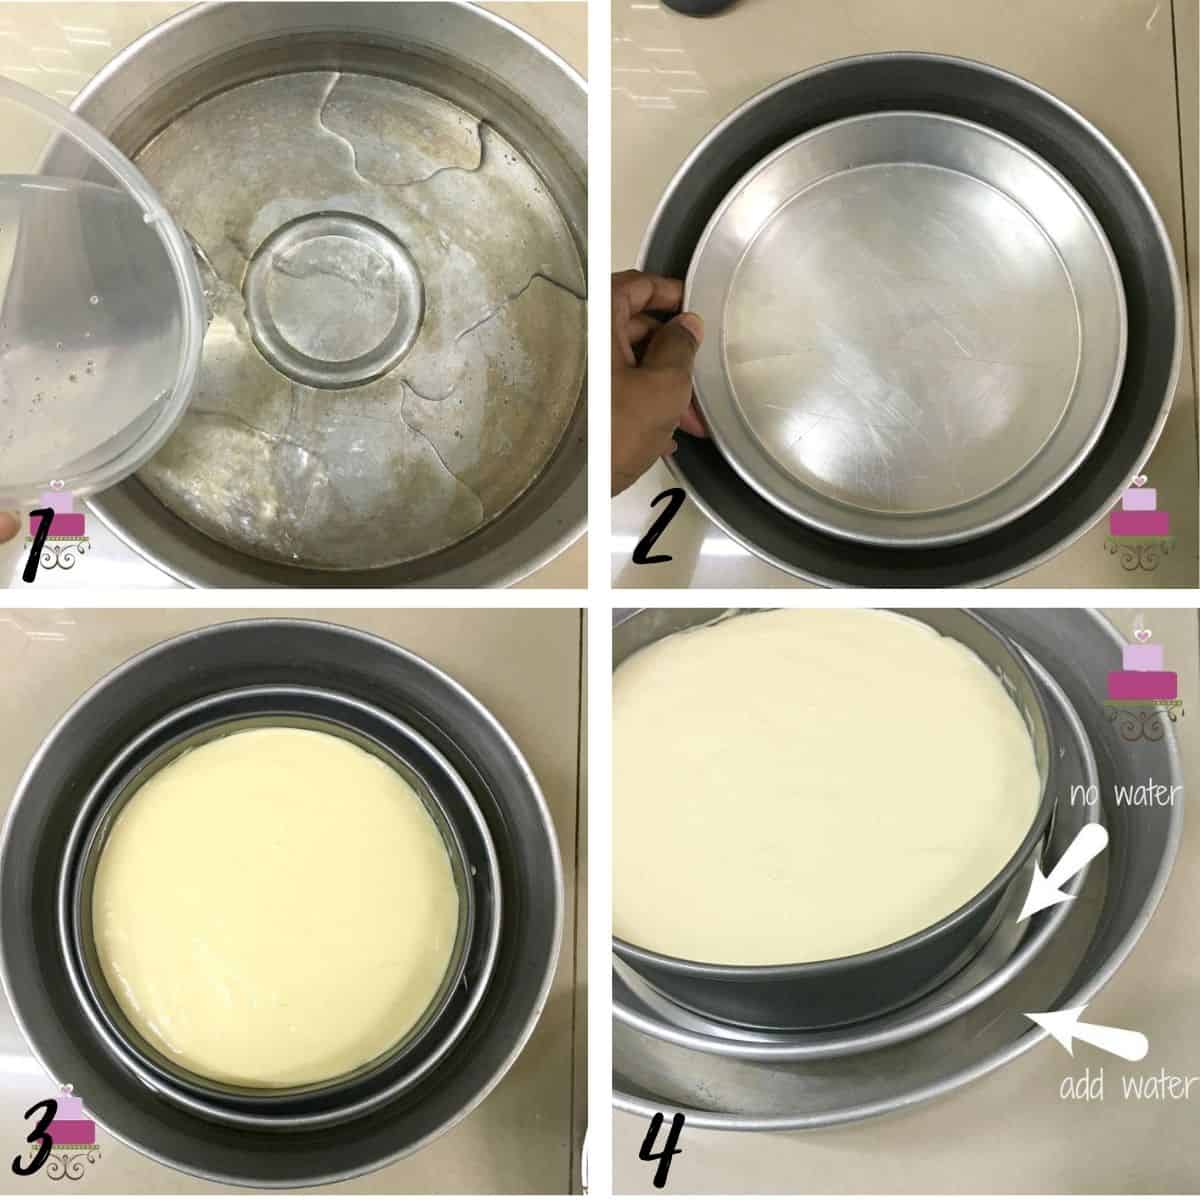 A poster of 4 images showing how to do a water bath for cakes.